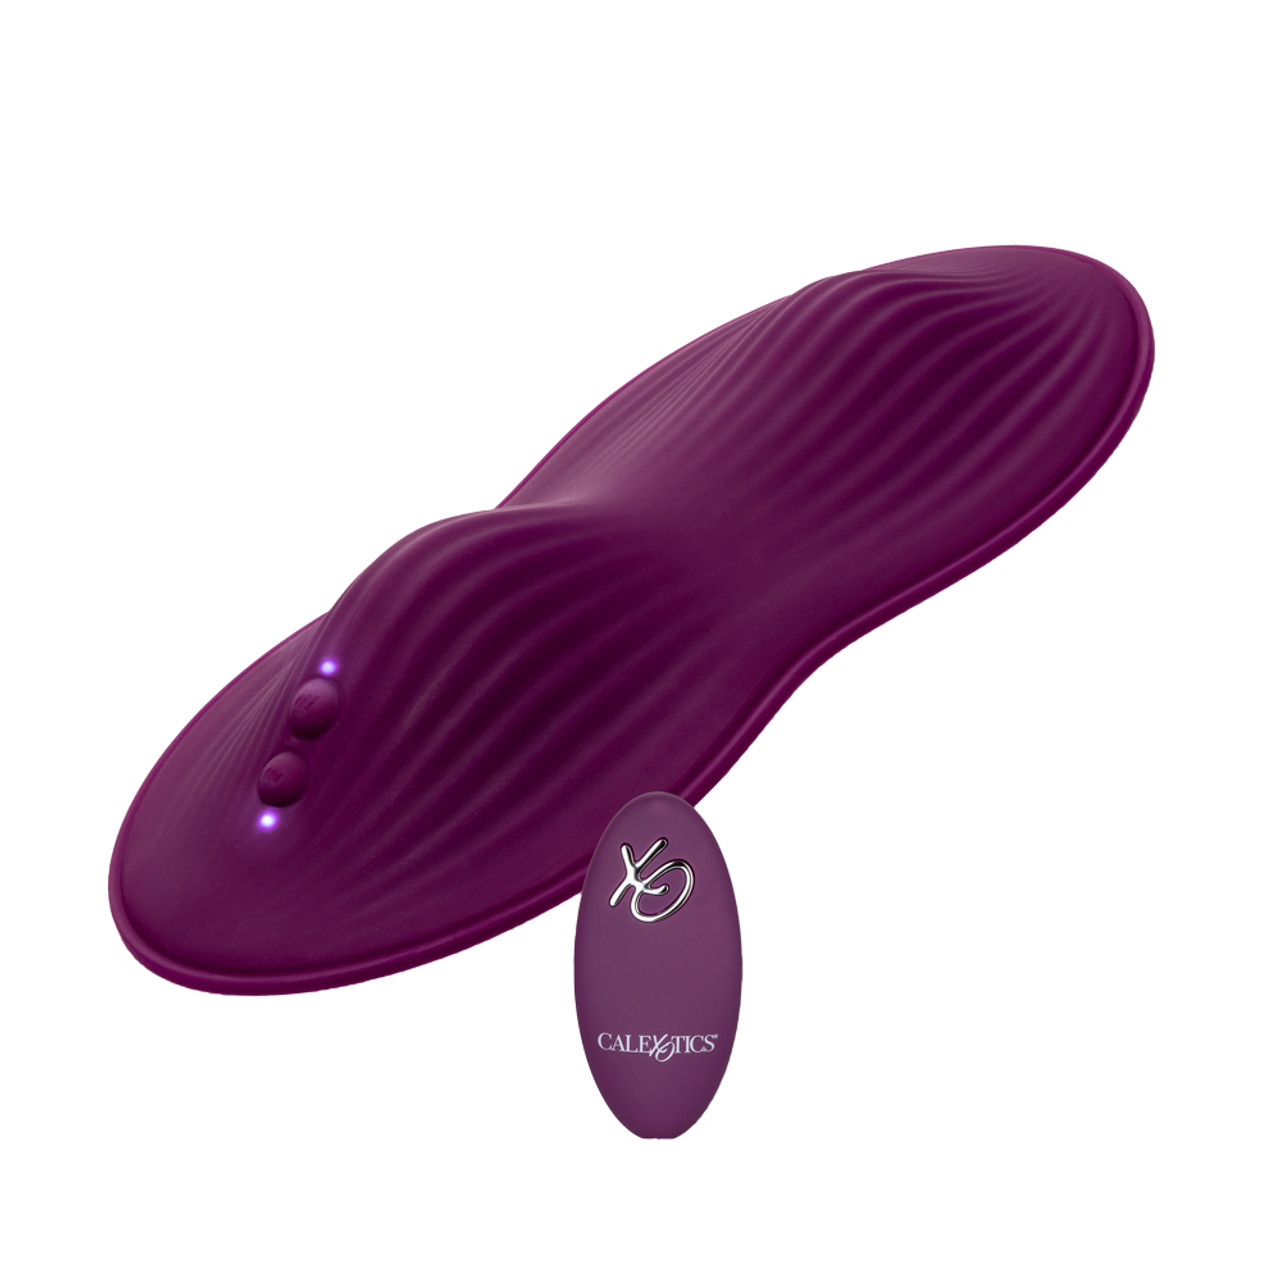 Buy the Lust Dual Rider 12-function Remote Control Rechargeable Rideable Dual Vibrating Textured Silicone Mat -